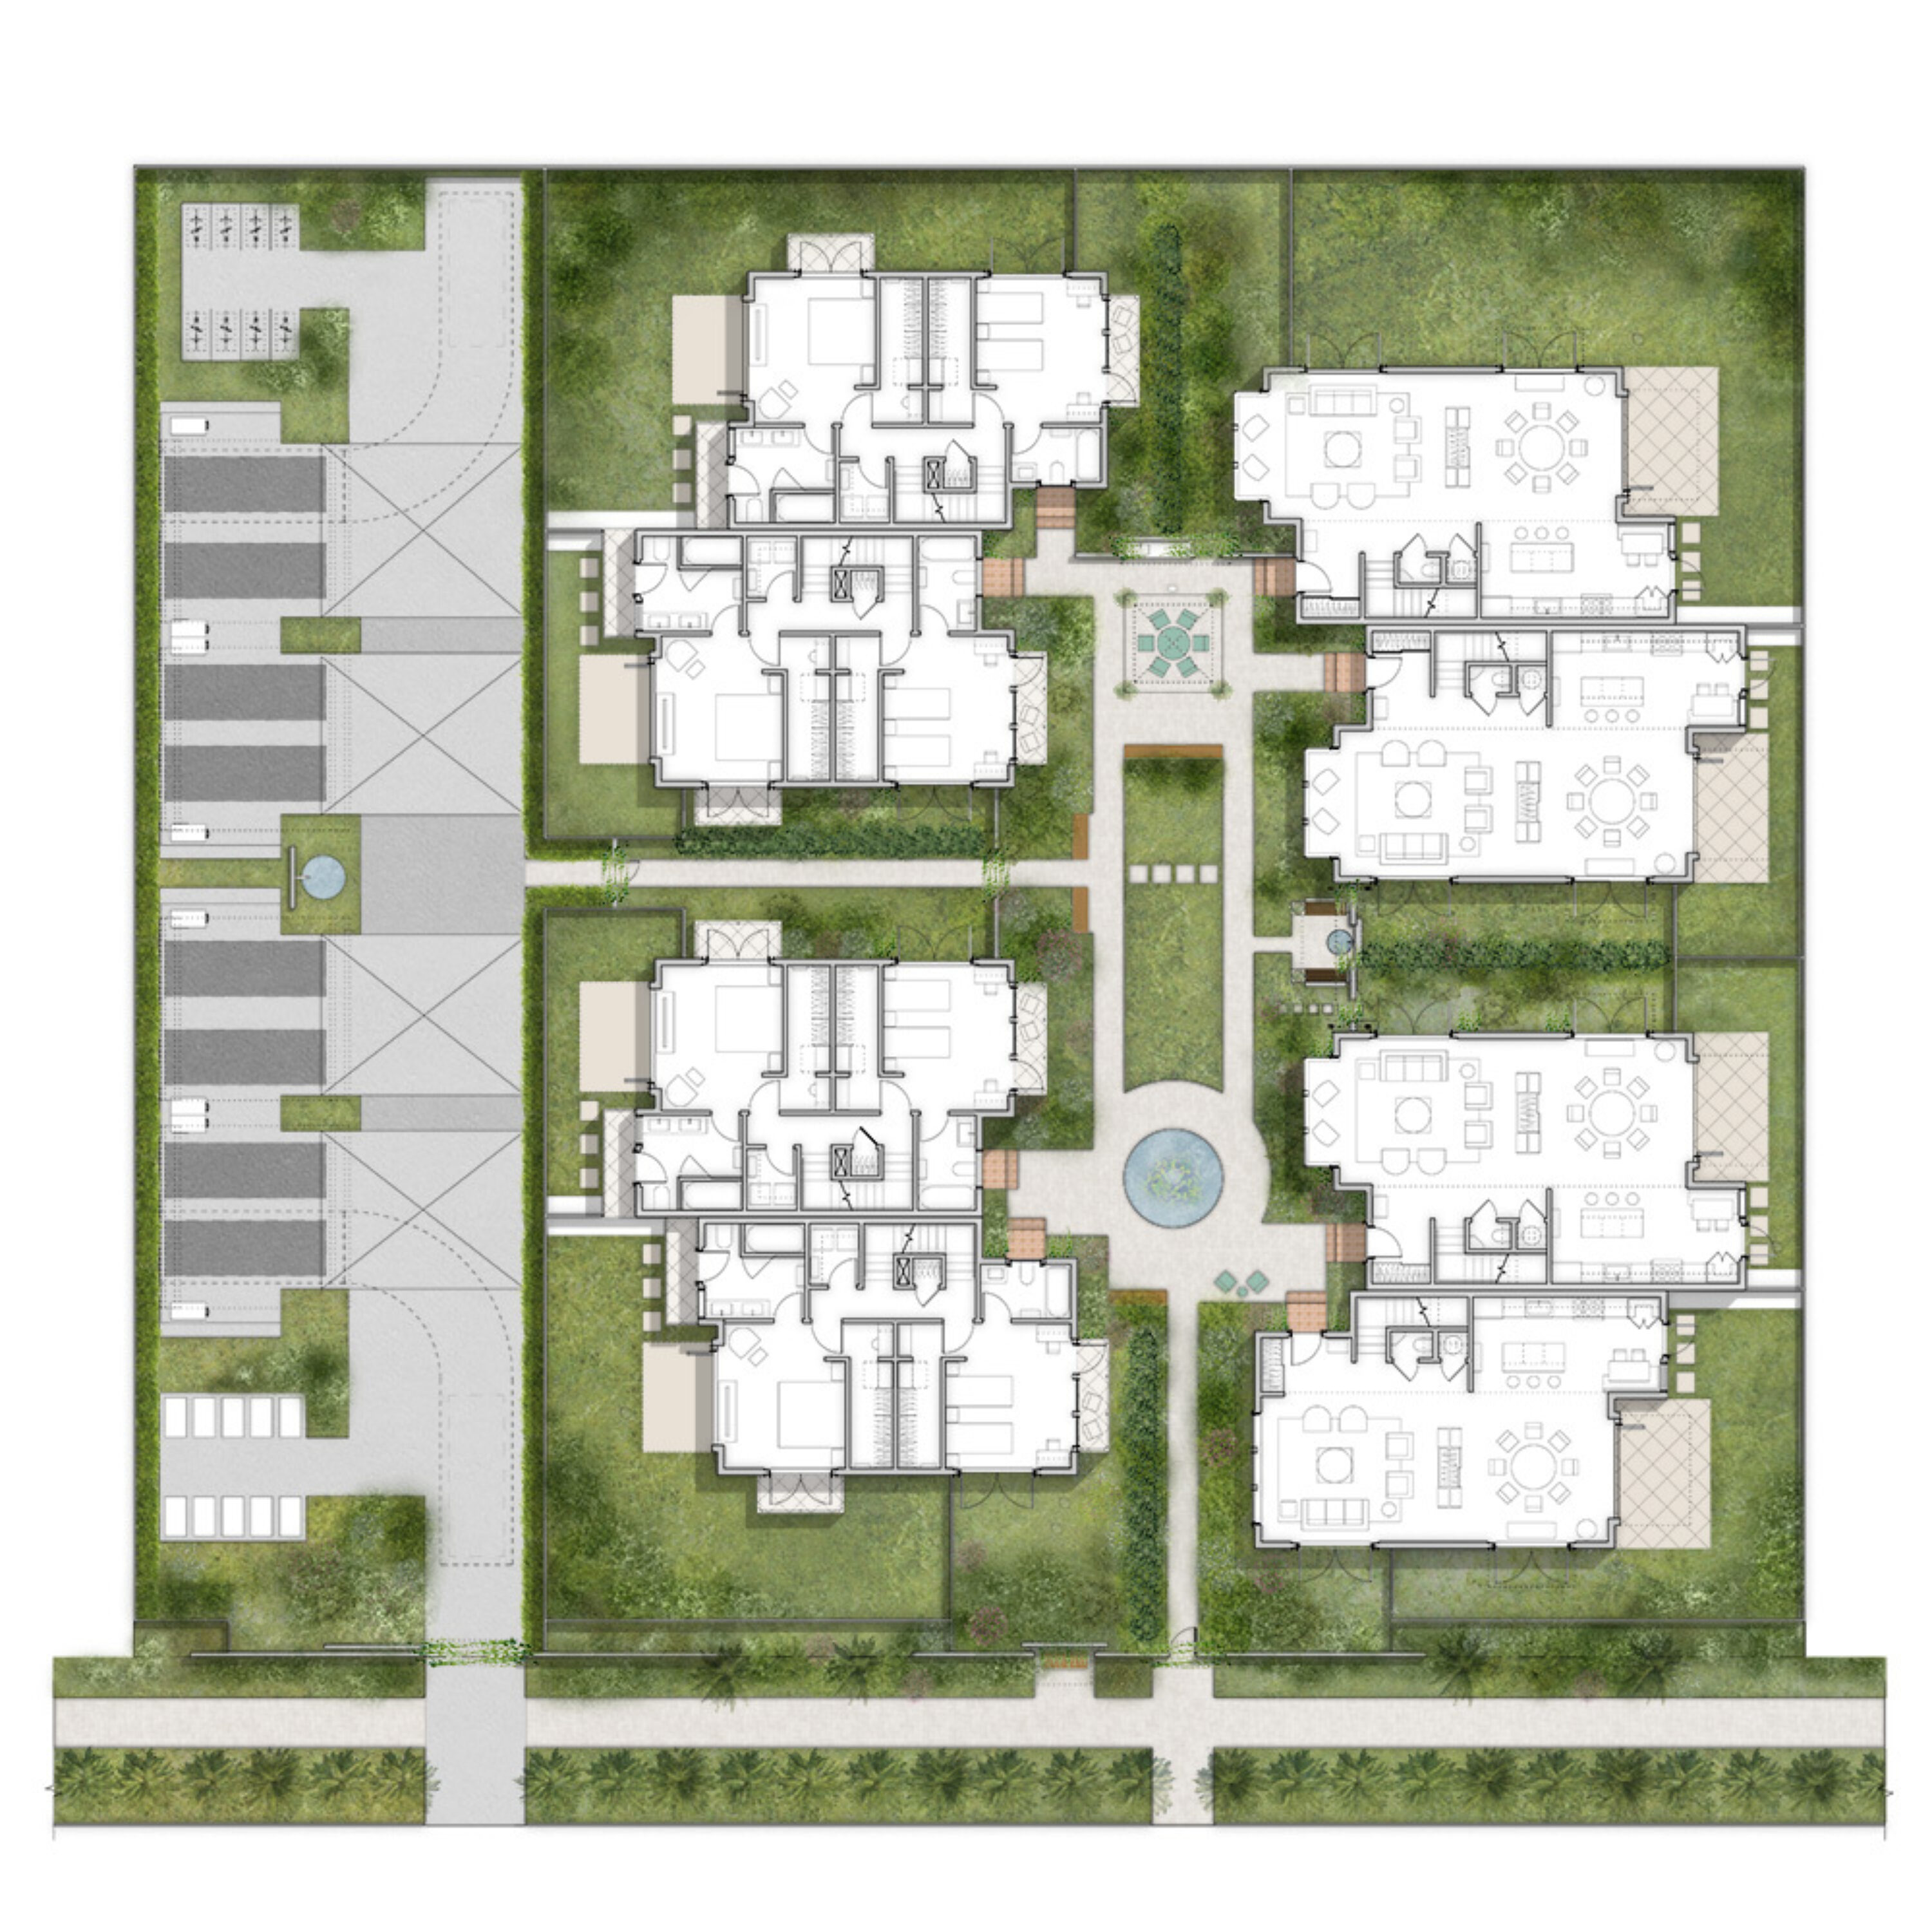 220206 Rendered Site Plan reduced copy 2